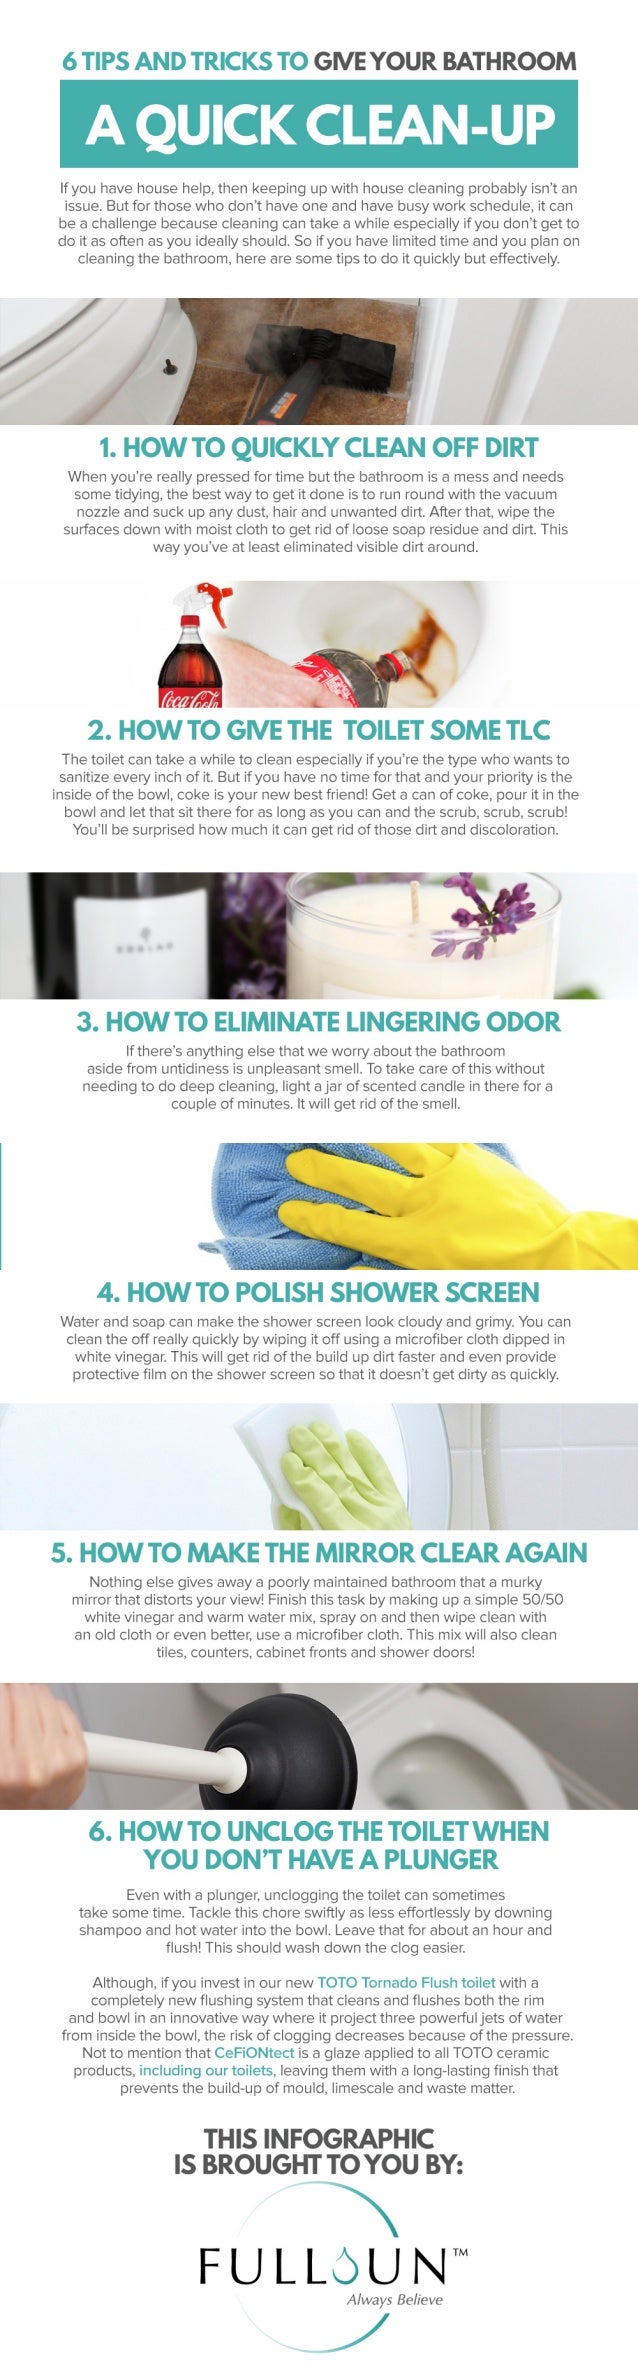 6 Tips And Tricks To Give Your Bathroom A Quick Clean Up